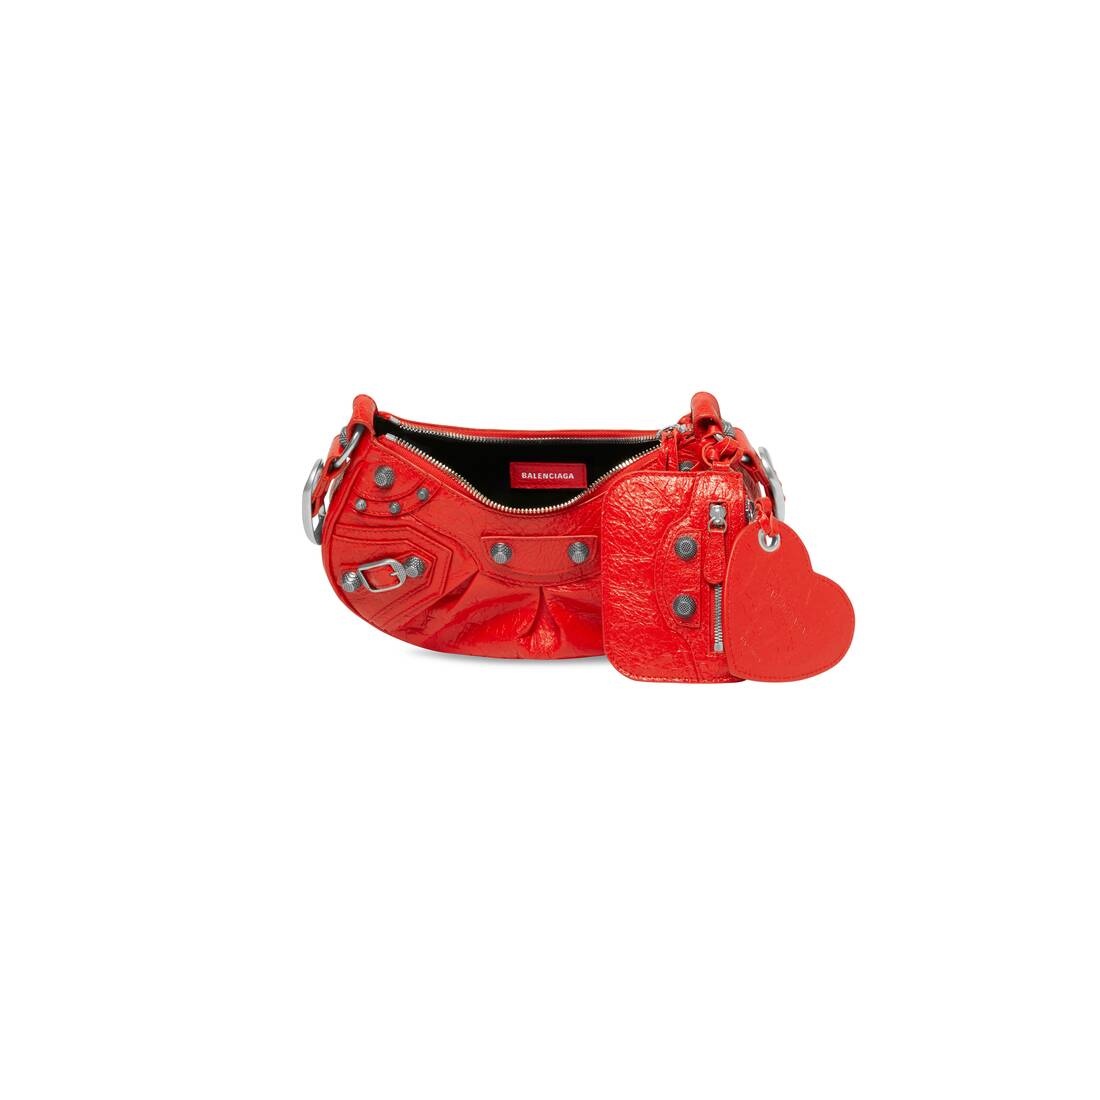 Women's Le Cagole Xs Shoulder Bag in Red - 8